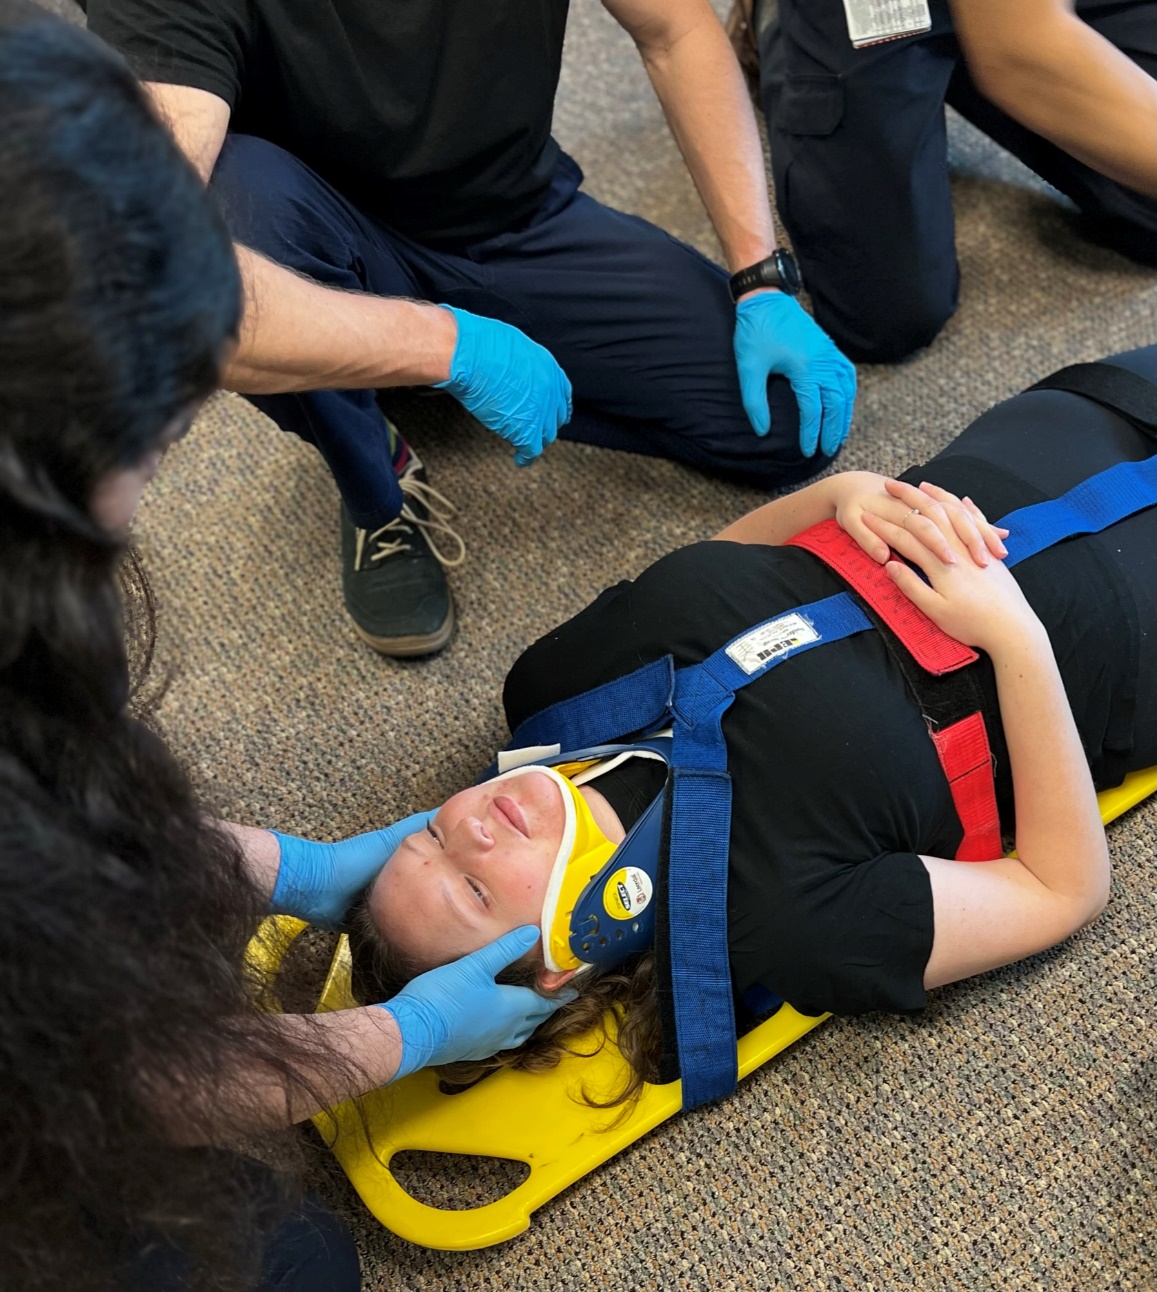 Photo of patient secured onto backboard with straps with gloved EMT holding manual C-spine immobilization.